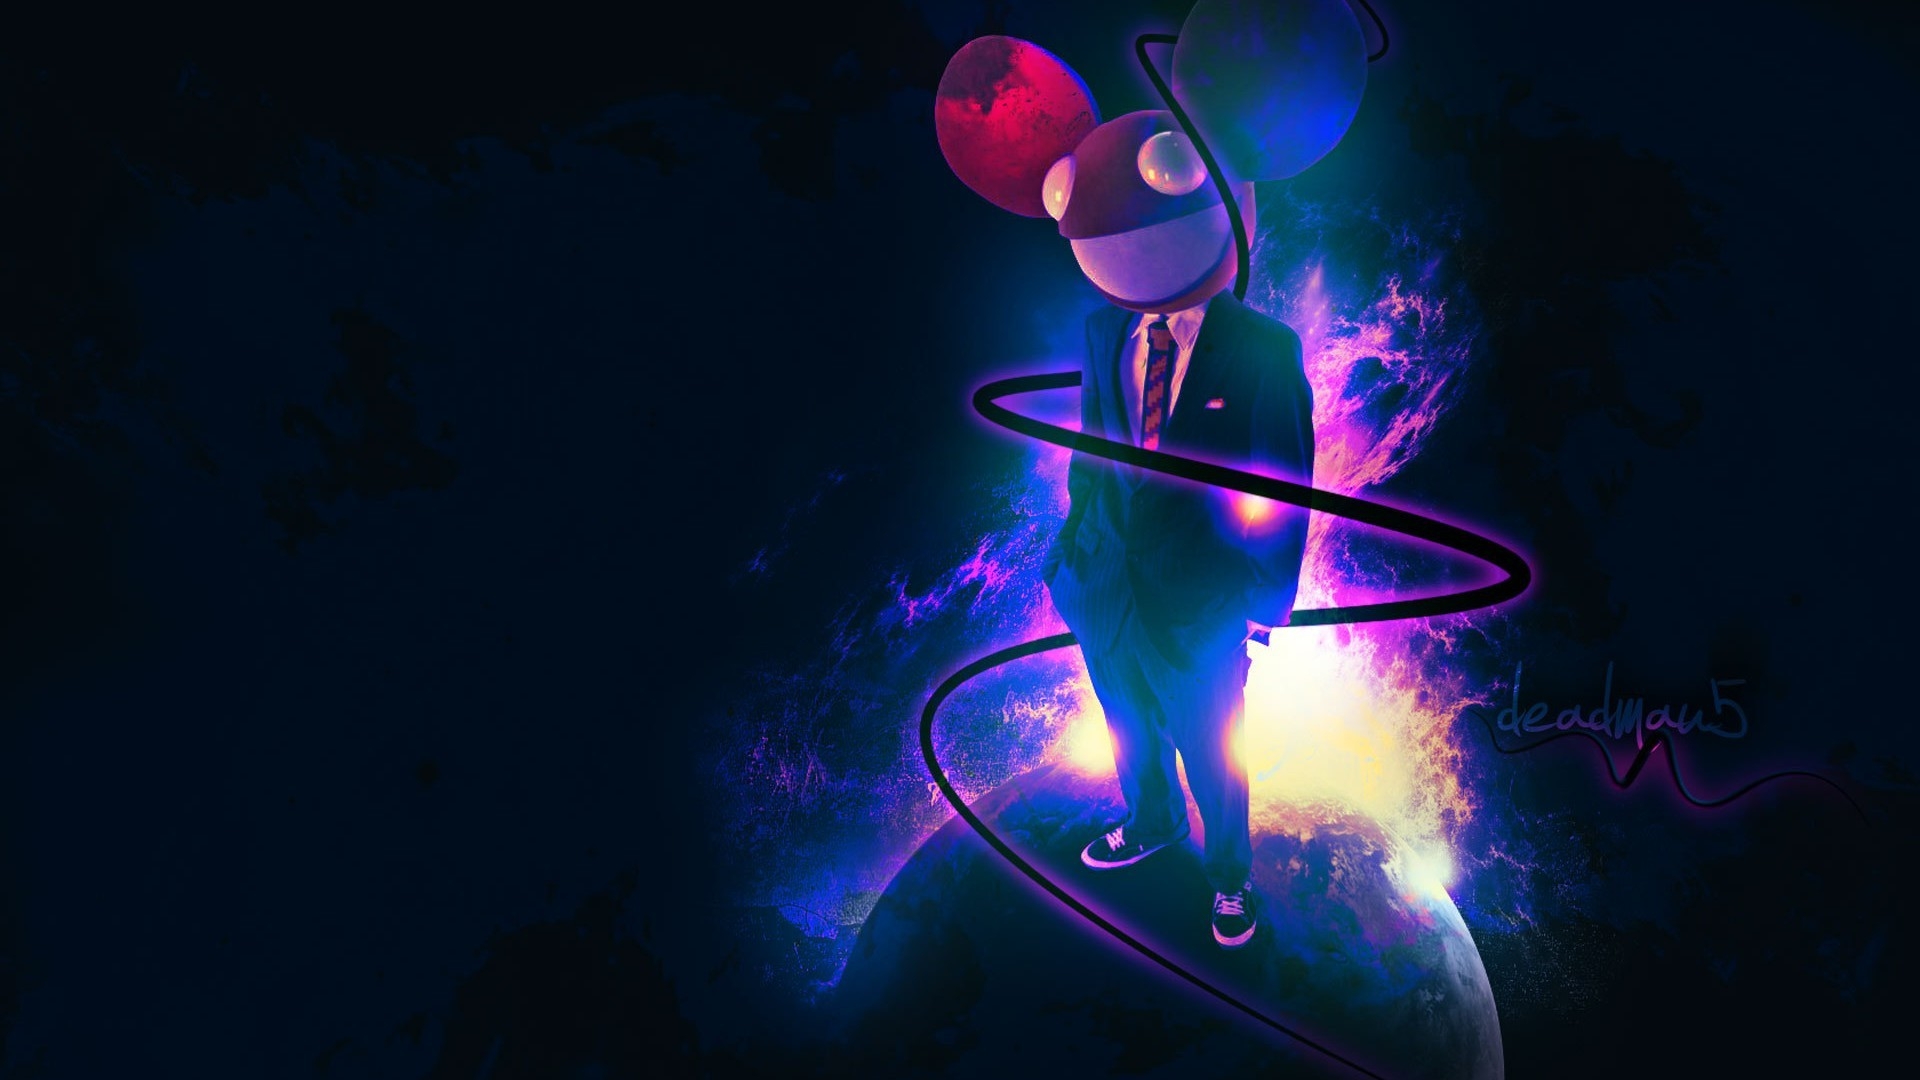 Deadmau5 Poster for 1920 x 1080 HDTV 1080p resolution